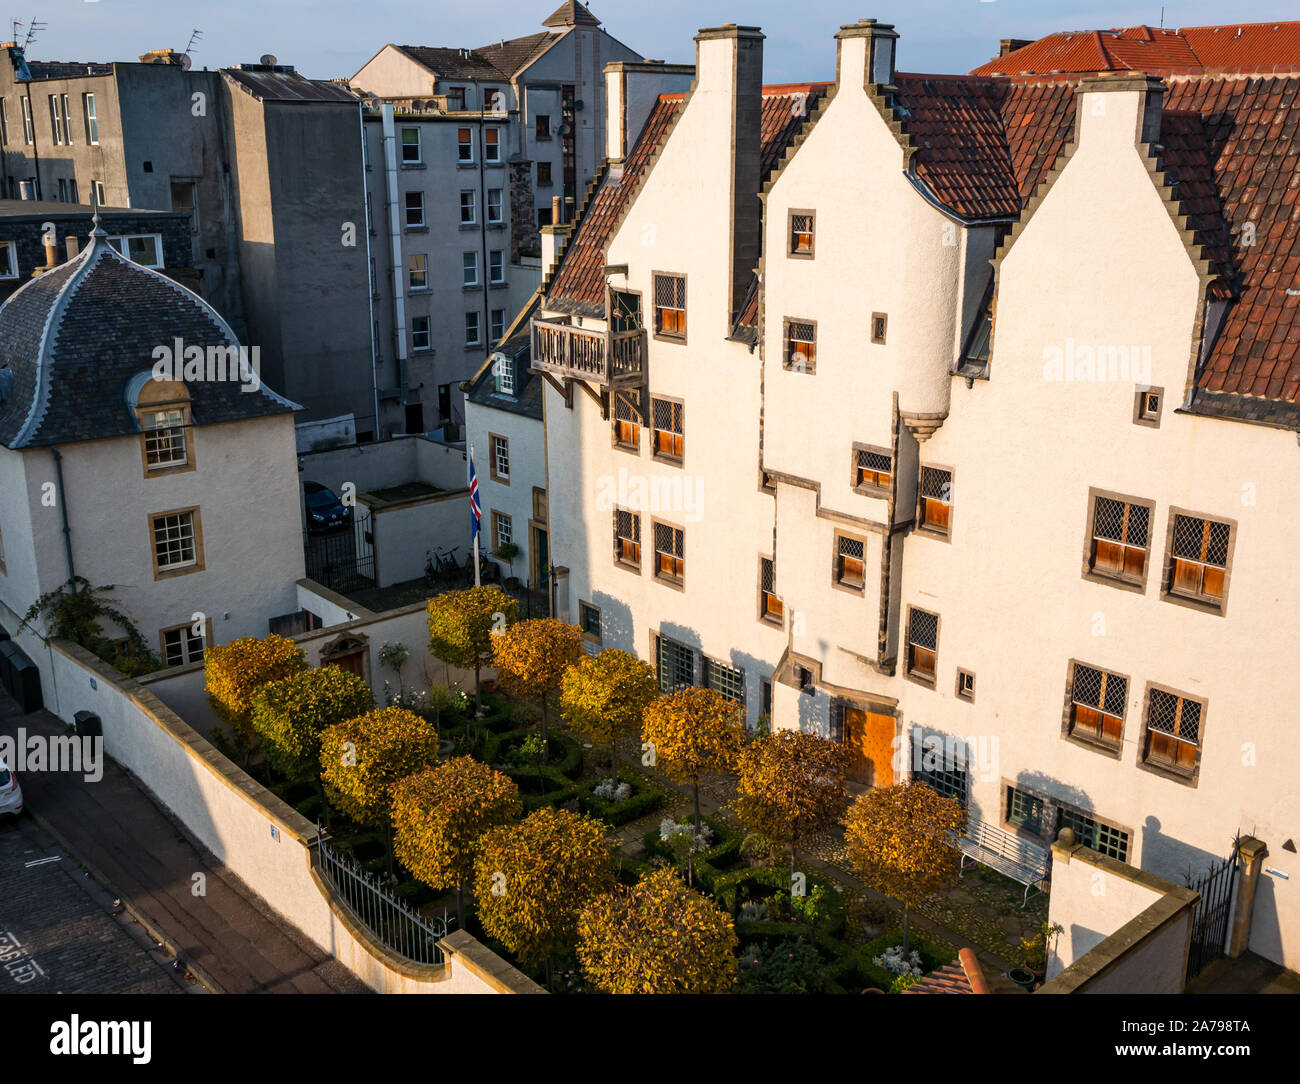 Leith, Edinburgh, Scotland, United Kingdom, 31st October 2019. UK Weather: Autumn colours in the box trees and low light as the sun goes down at Lamb's House, a restored 17th century Hanseatic Merchant's House with distinctive Dutch-style stepped gables and original 'wind doors', part of which is now the Icelandic Consulate Stock Photo